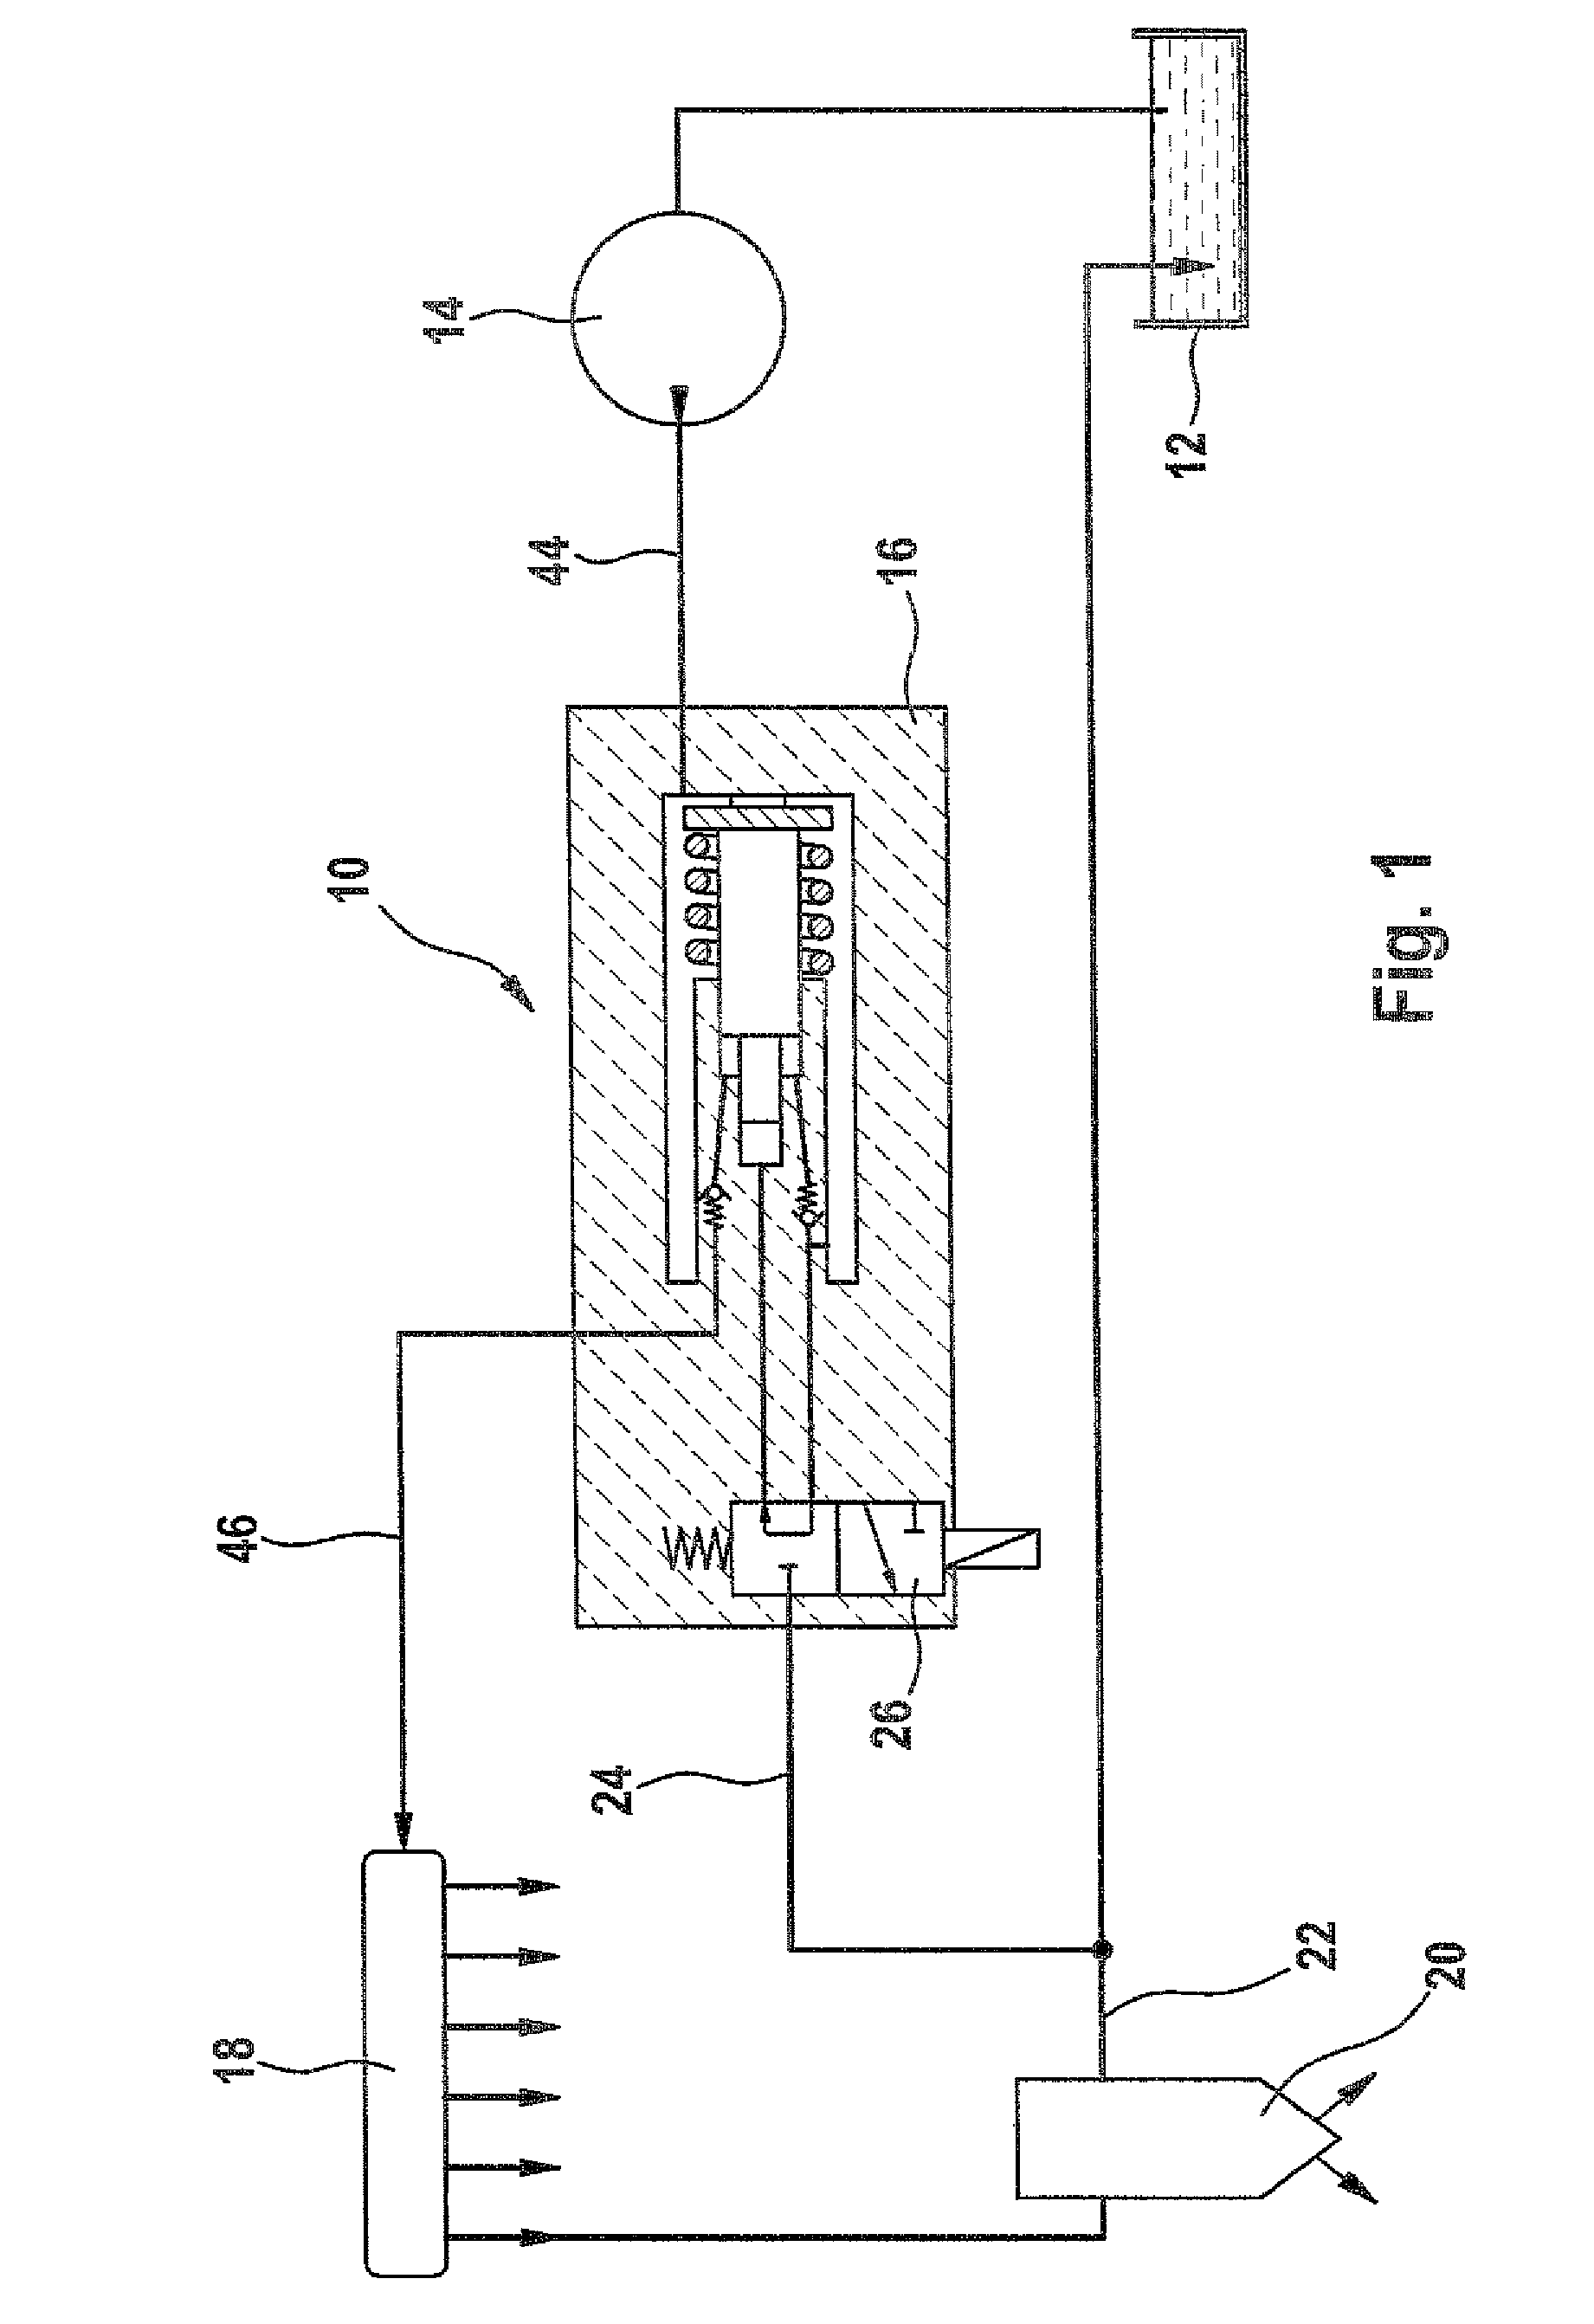 Pressure boosting system for at least one fuel injector